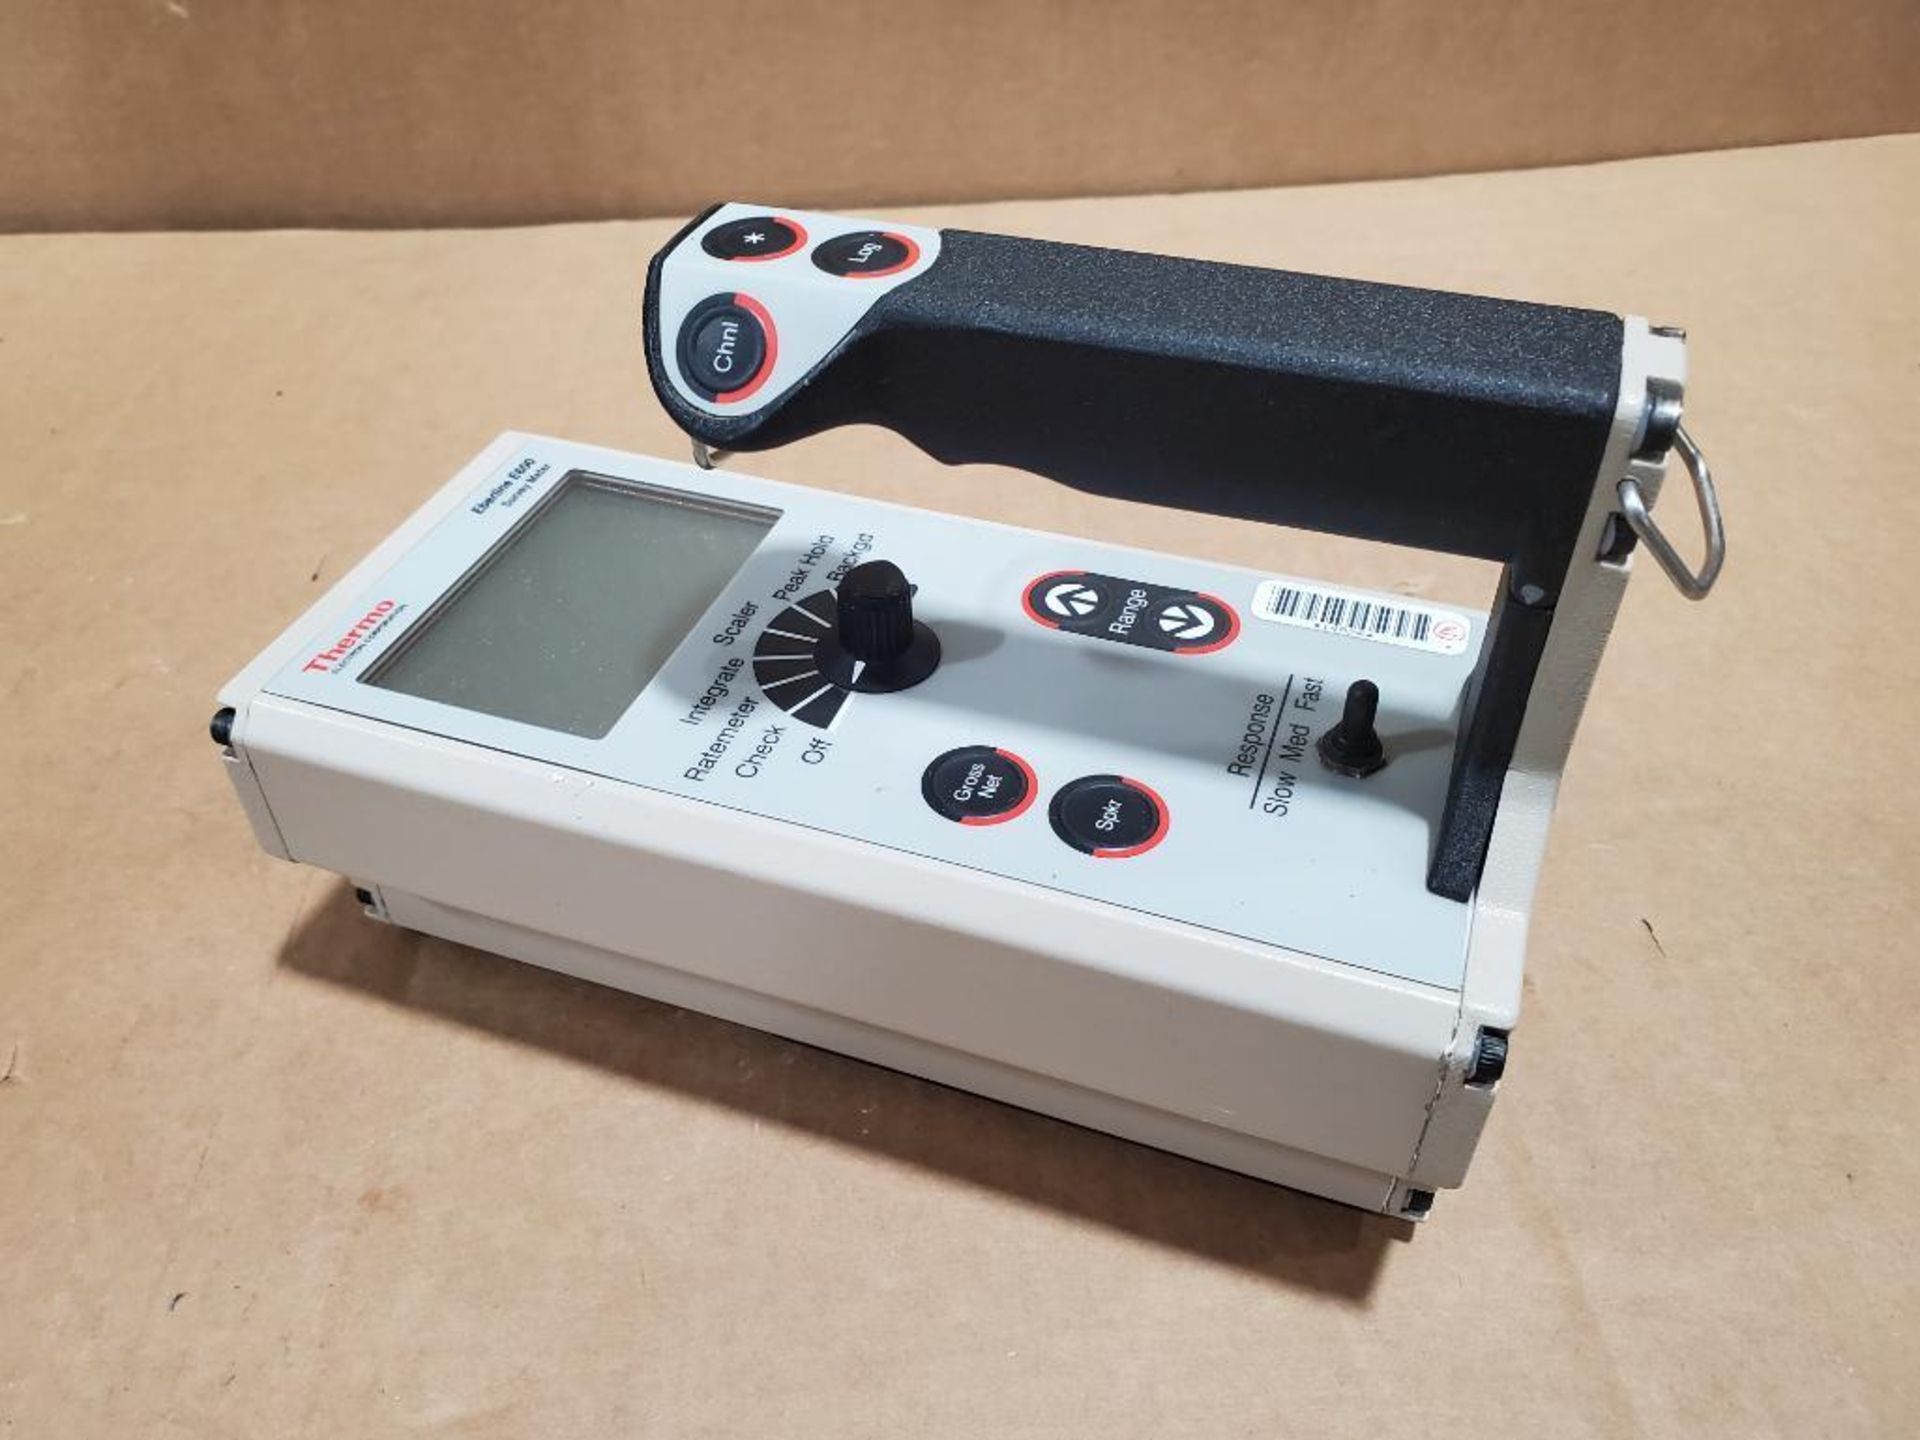 Thermo Electron Corporation geiger counter survey meter. Model Eberline E600. - Image 8 of 10